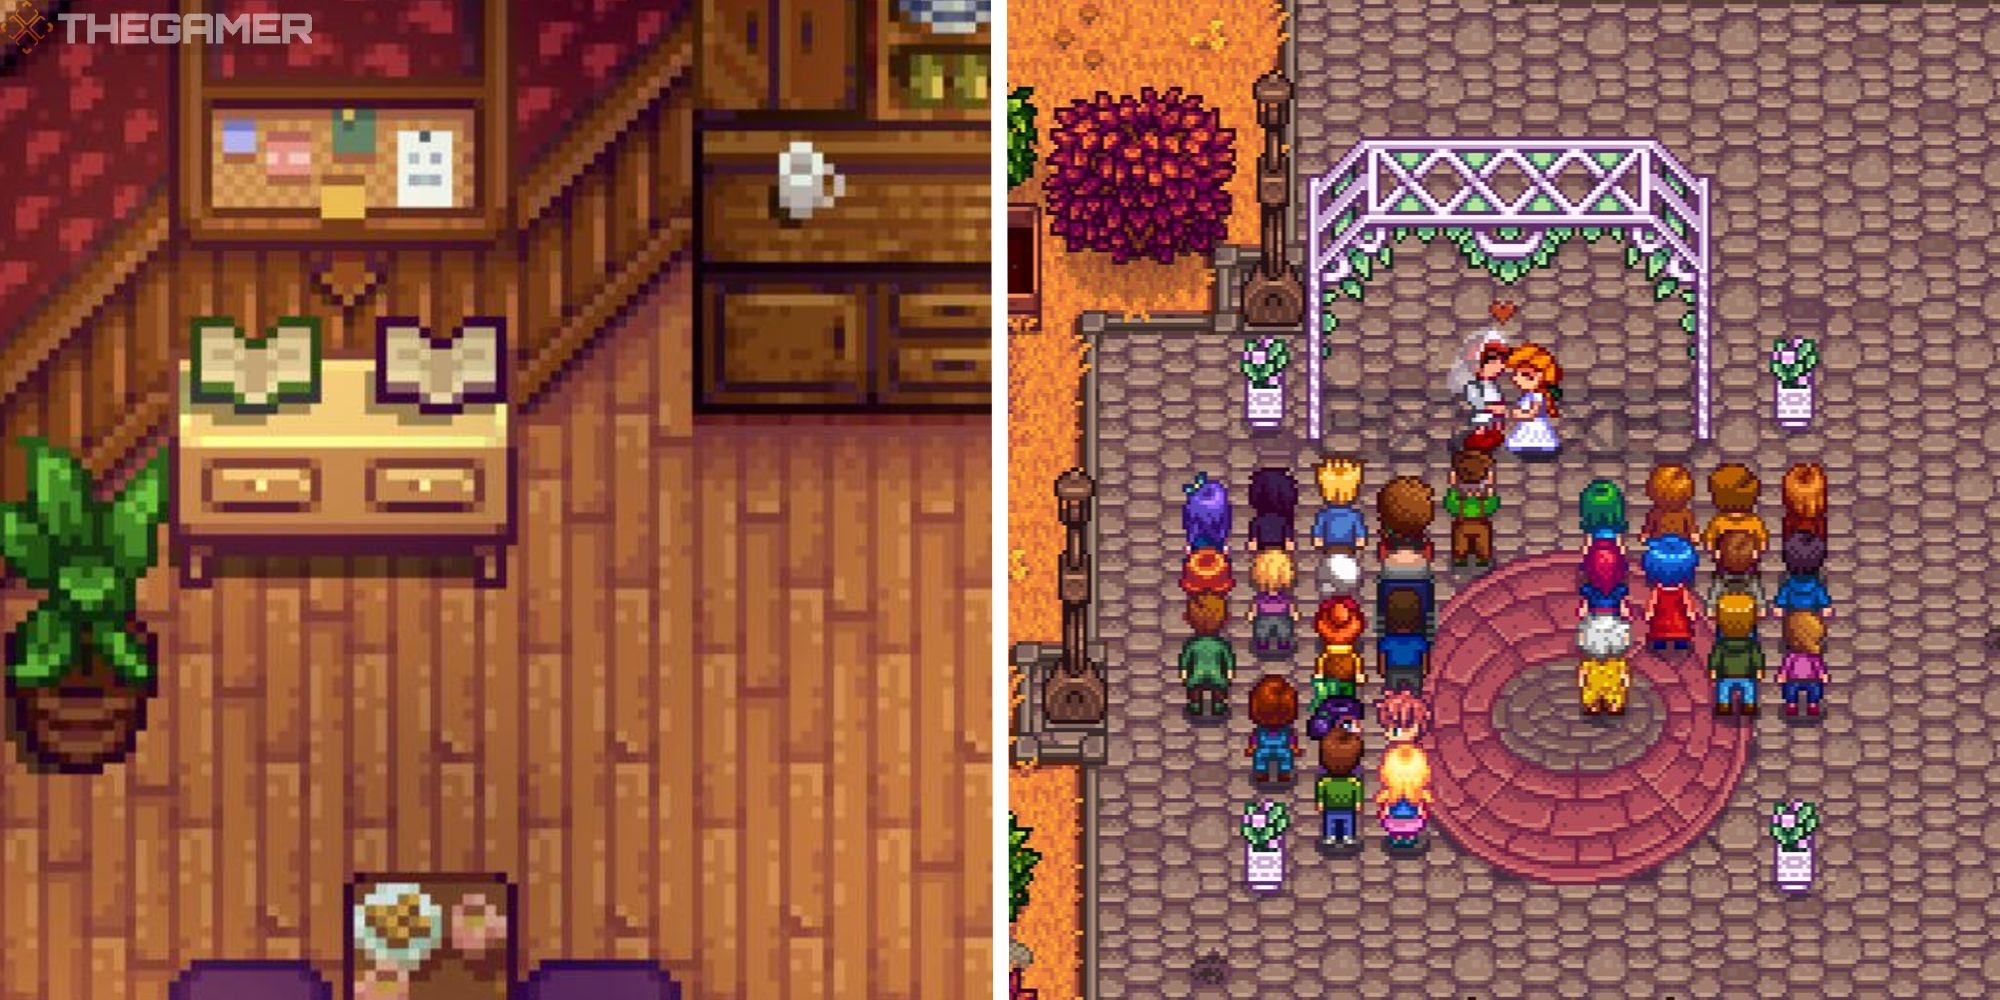 stardew valley image of mayor's divorce book next to image of player getting married